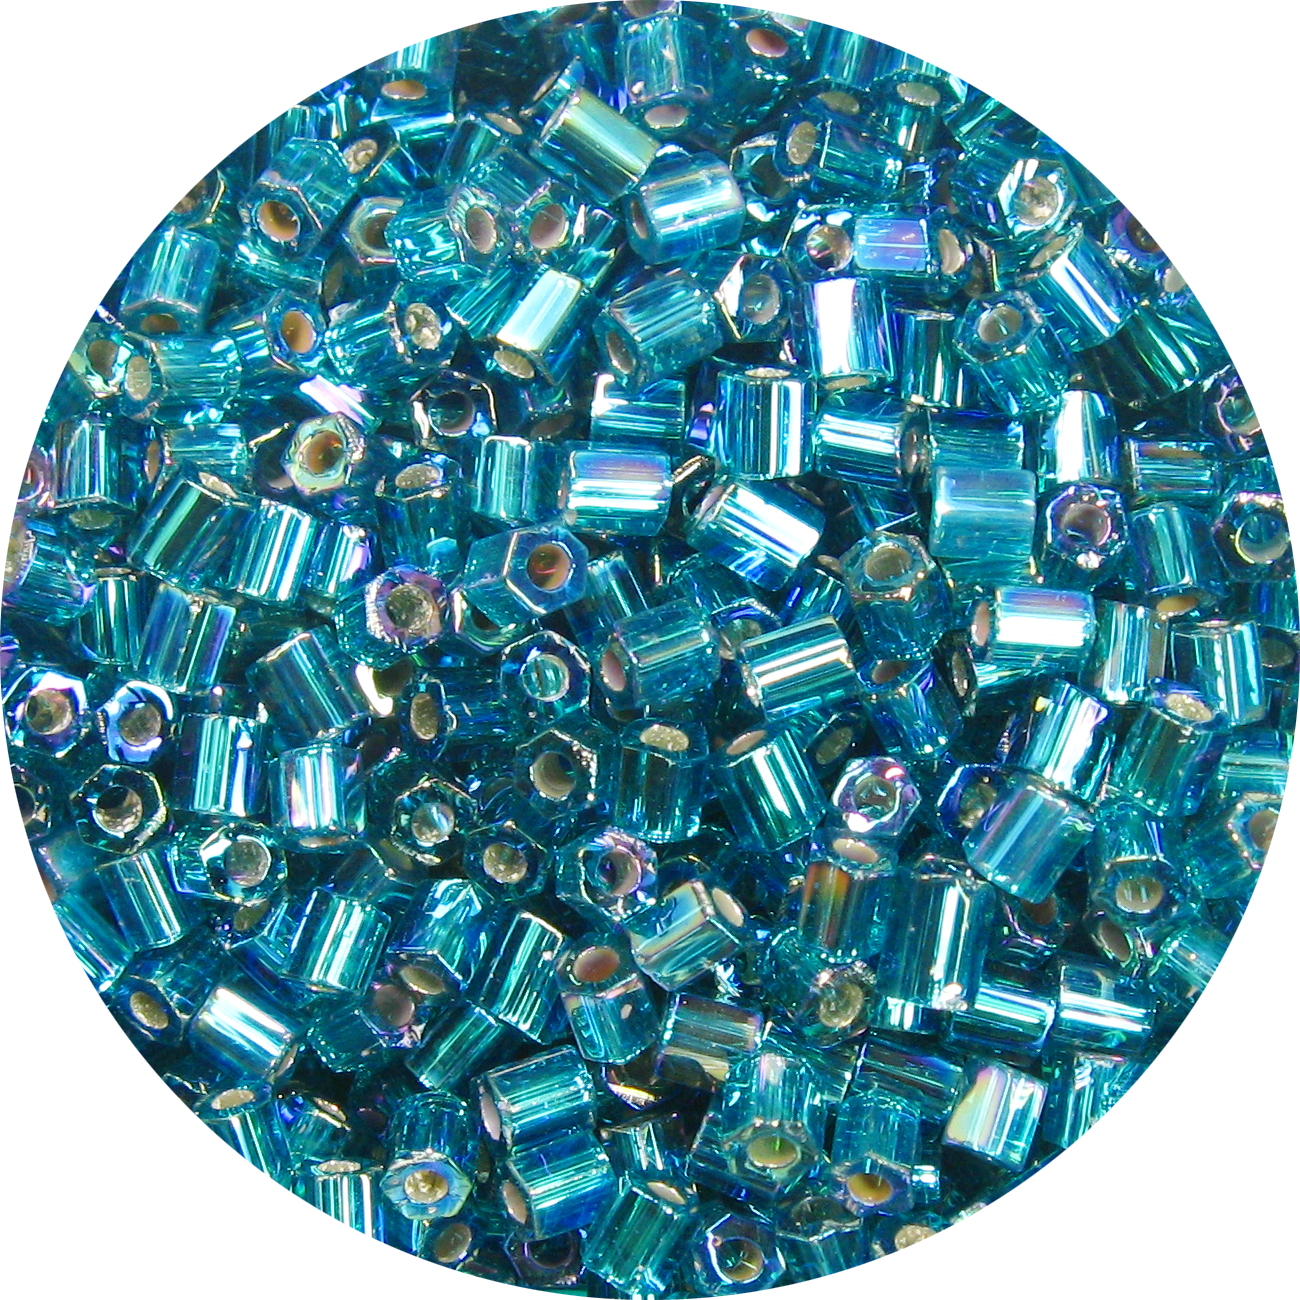 Miyuki Delica Seed Bead 11/0 Caribbean Teal Silver Lined 2-inch Tube D